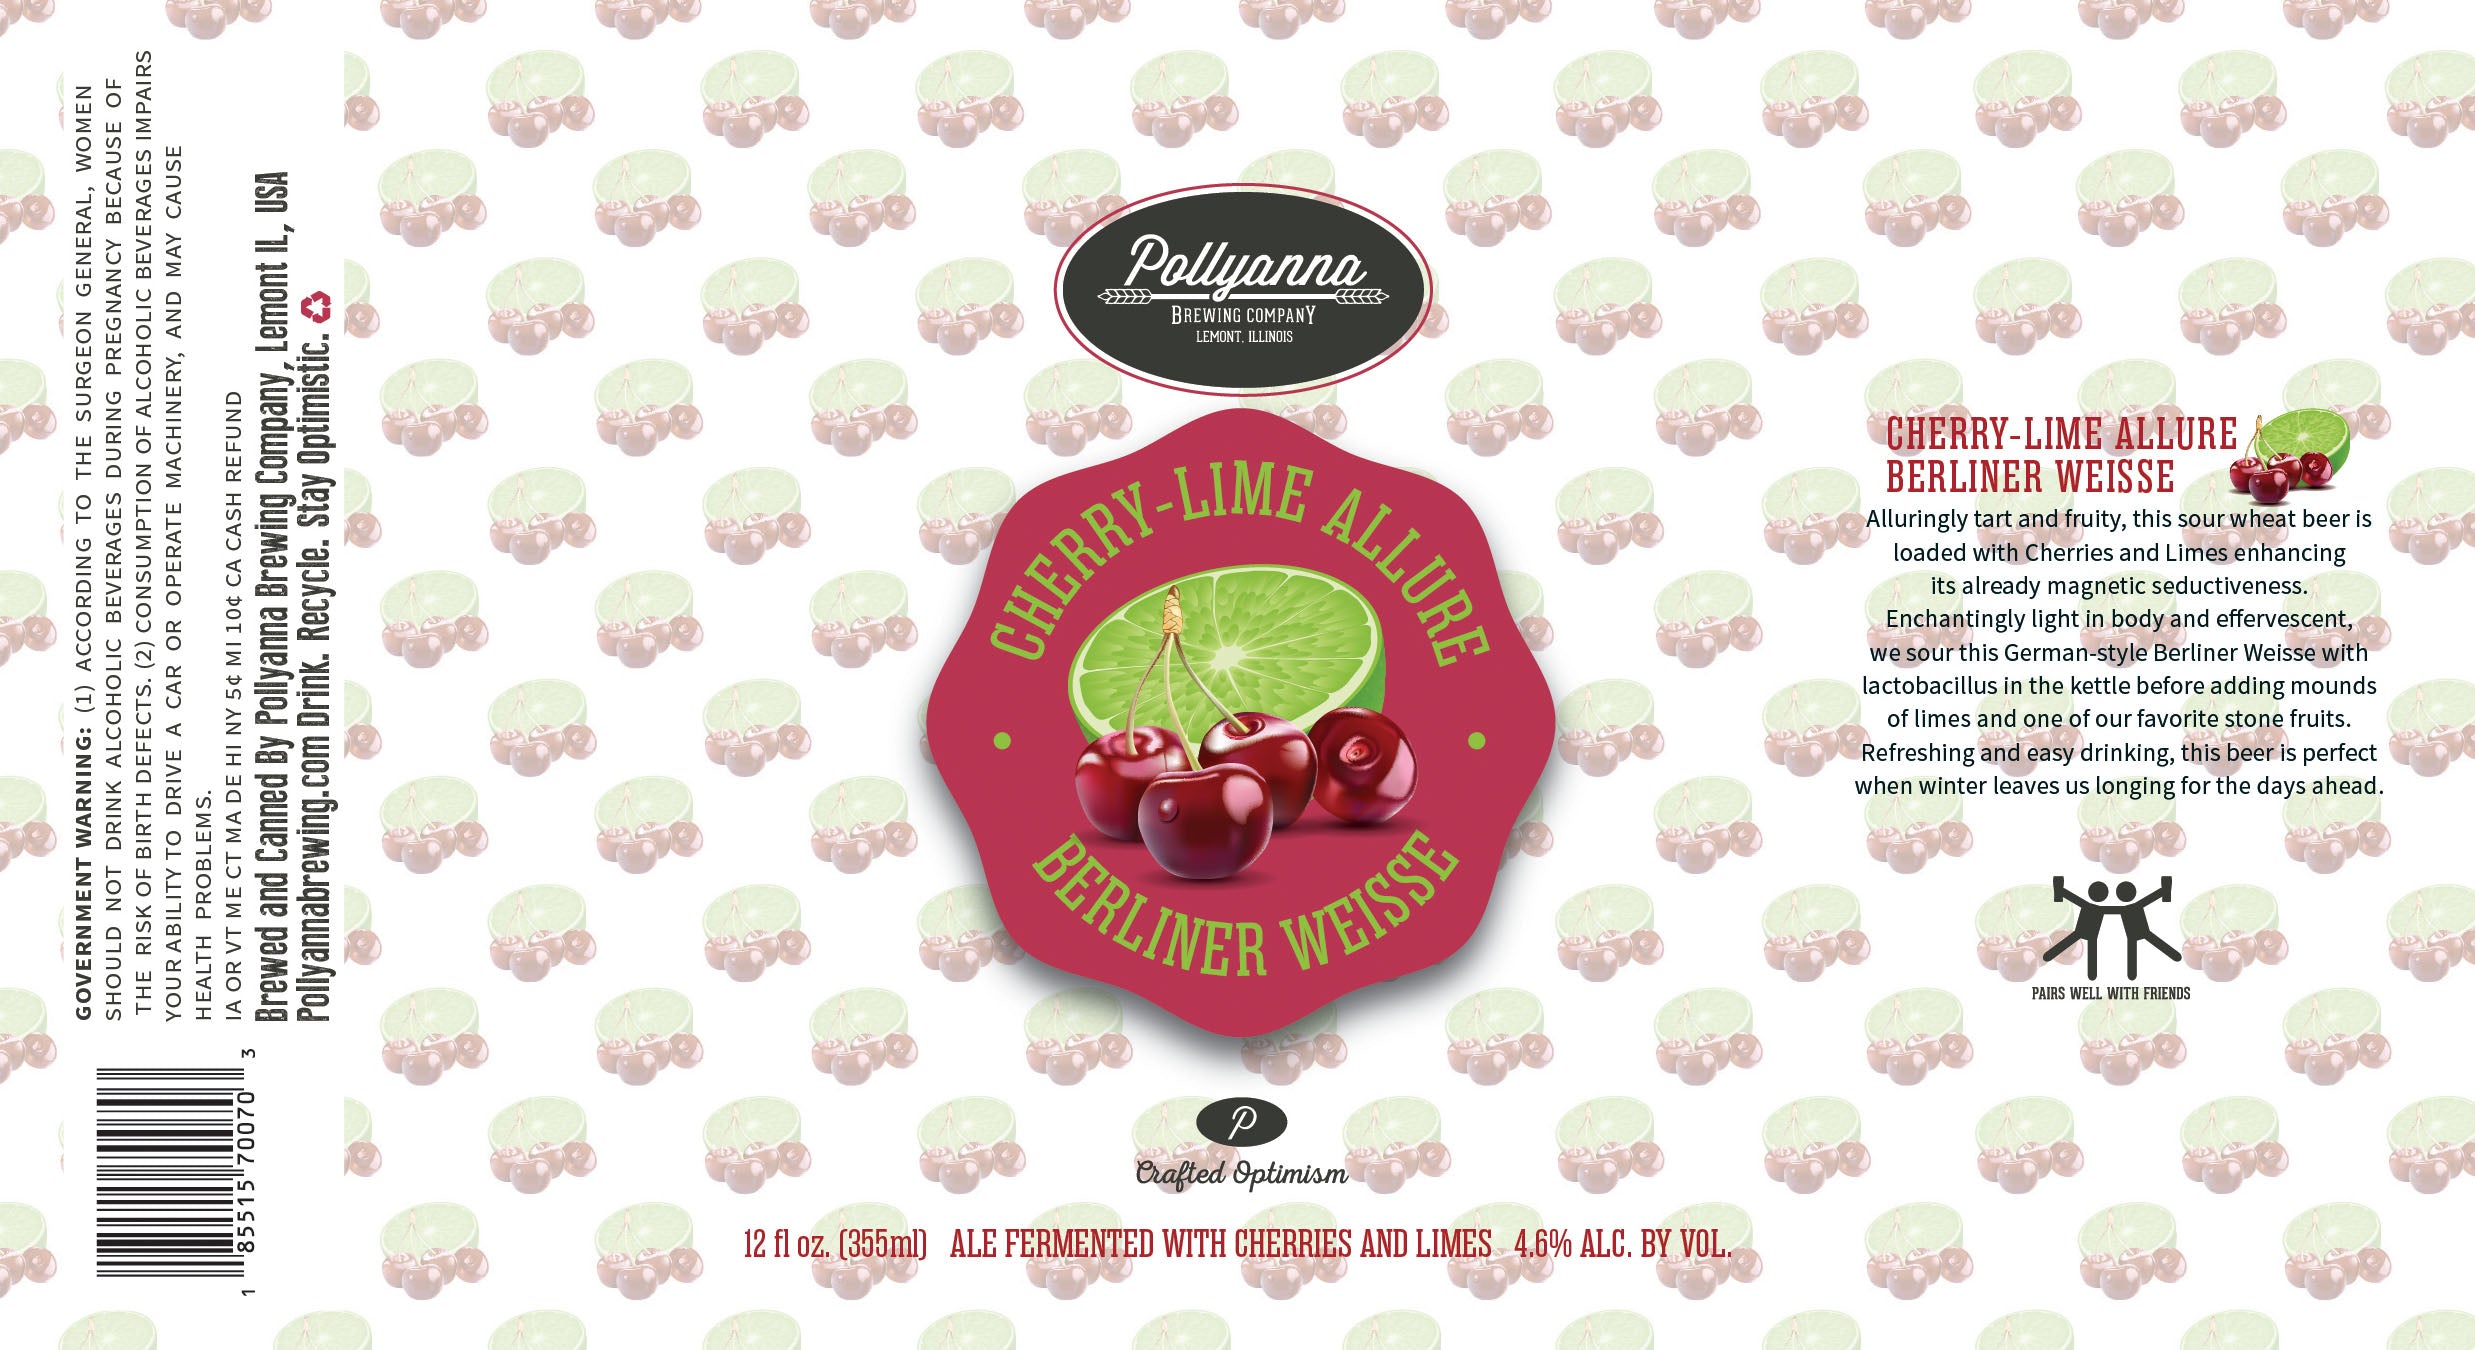 Image result for pollyanna cherry lime allure